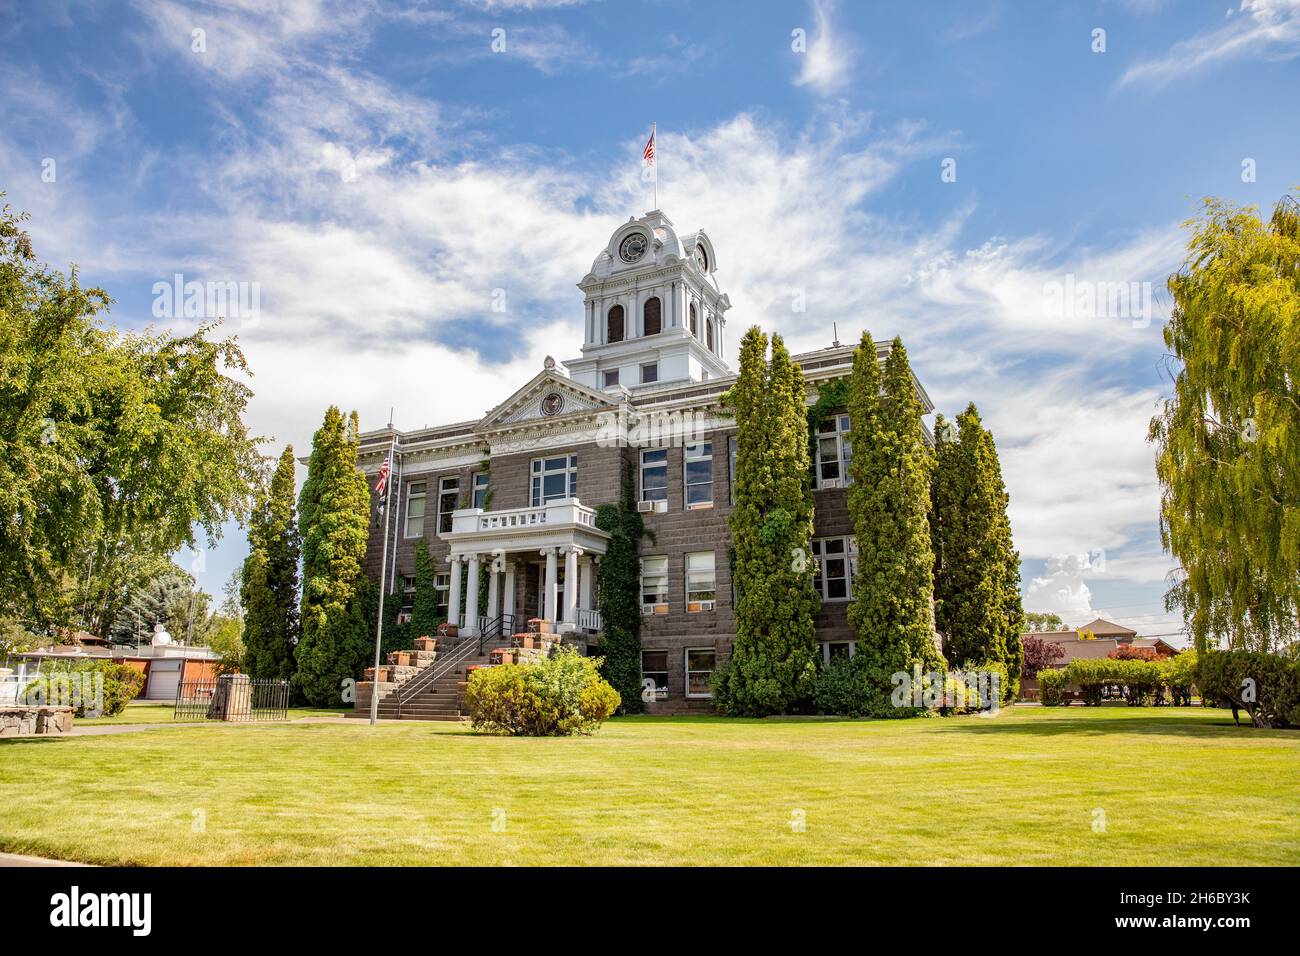 Crook County Courthouse in Prineville, Oregon, USA. Sonniger Sommertag. Stockfoto